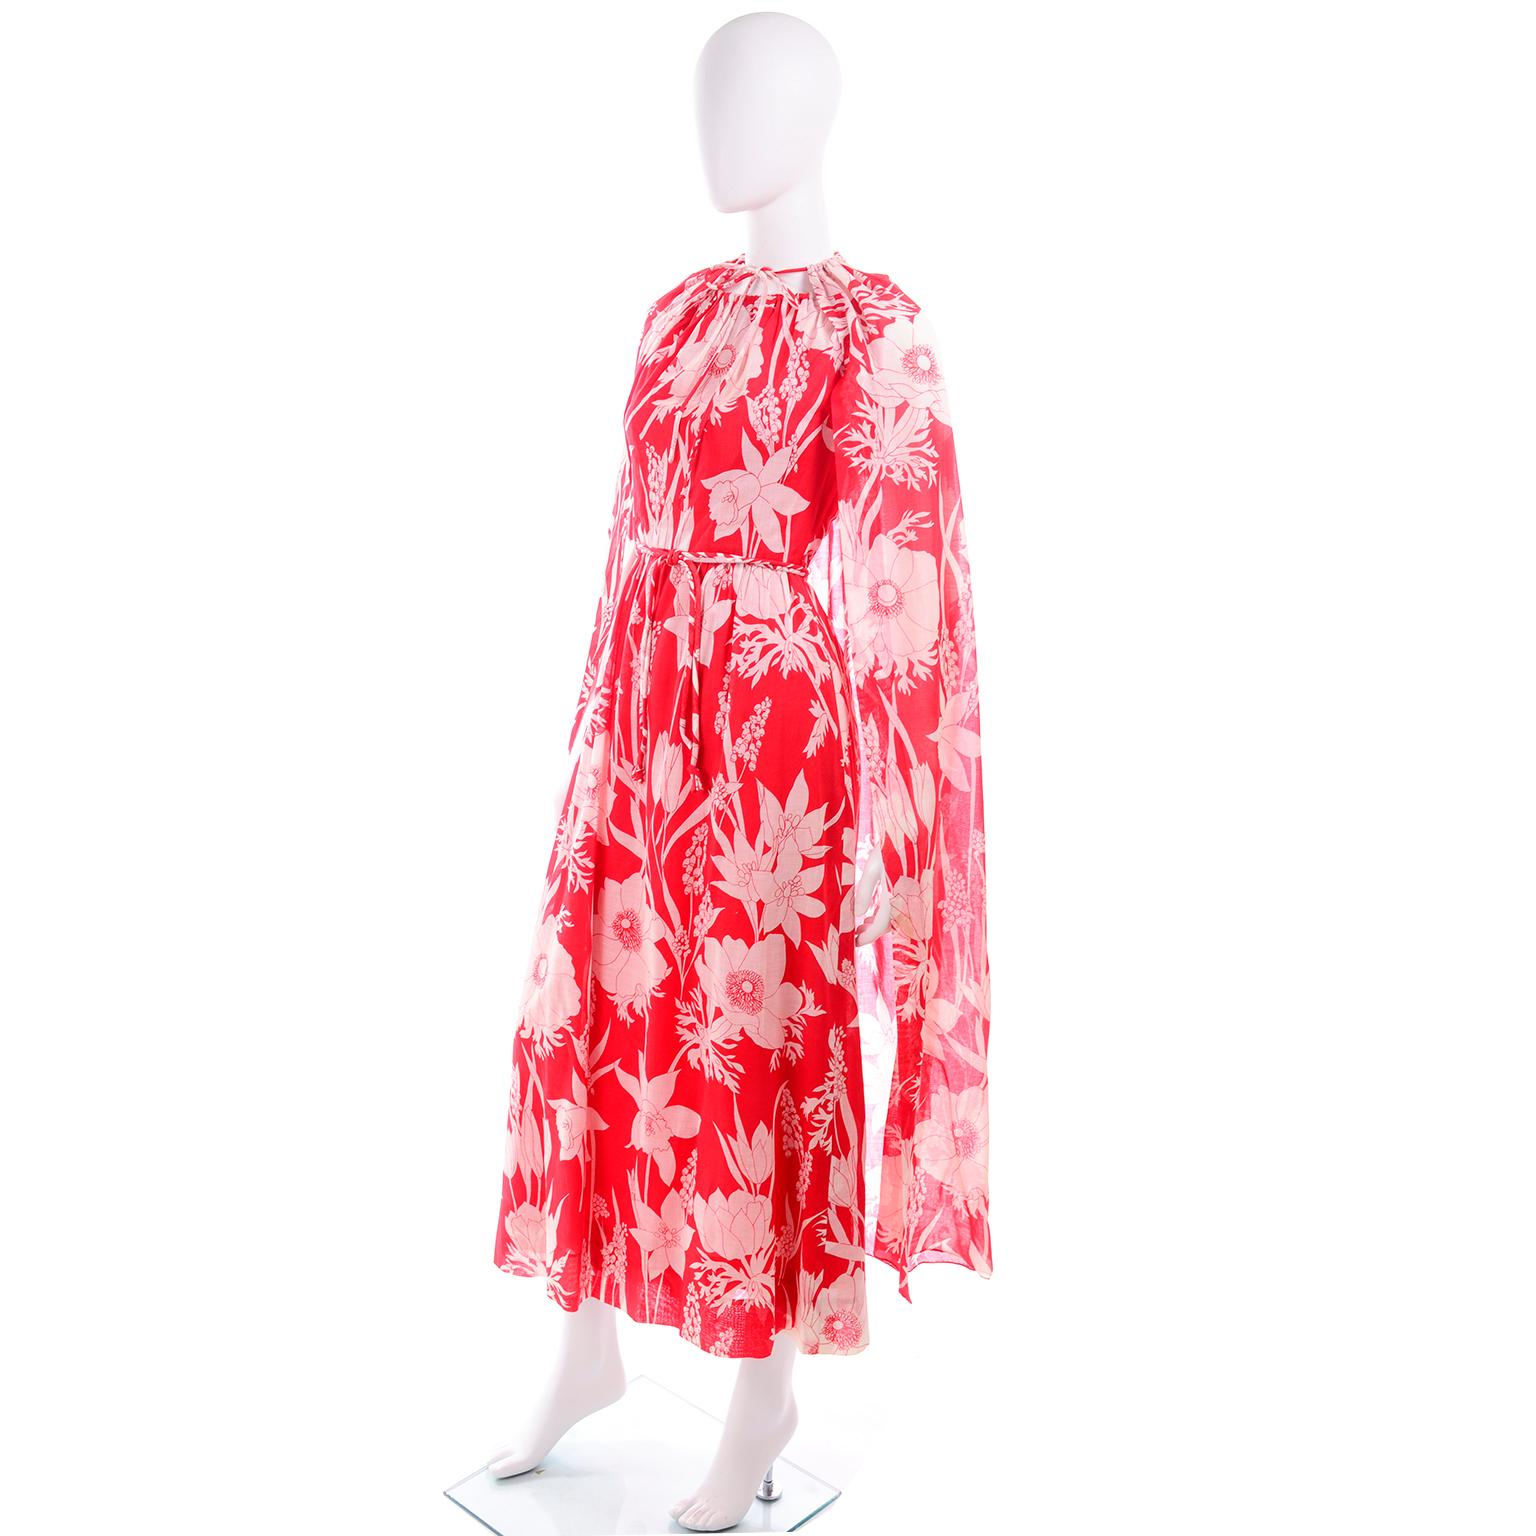 Adele Simpson Vintage 1970s Dress & Cape in Red & White Cotton Floral Print  2